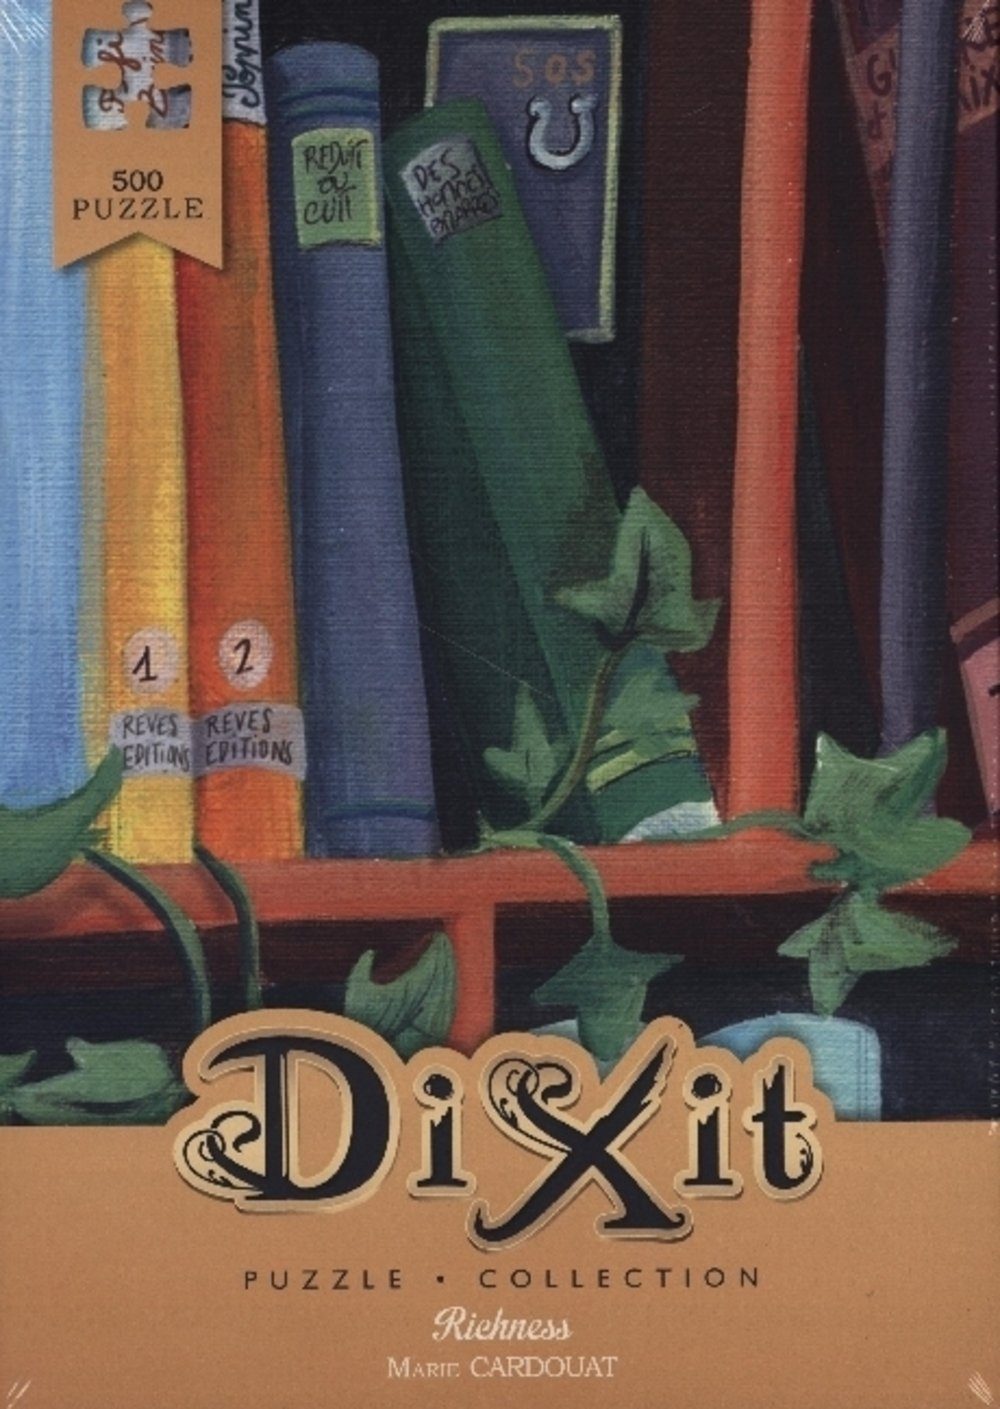 Asmodee Puzzle Dixit Richness, Puzzle-Collection 500 Puzzleteile